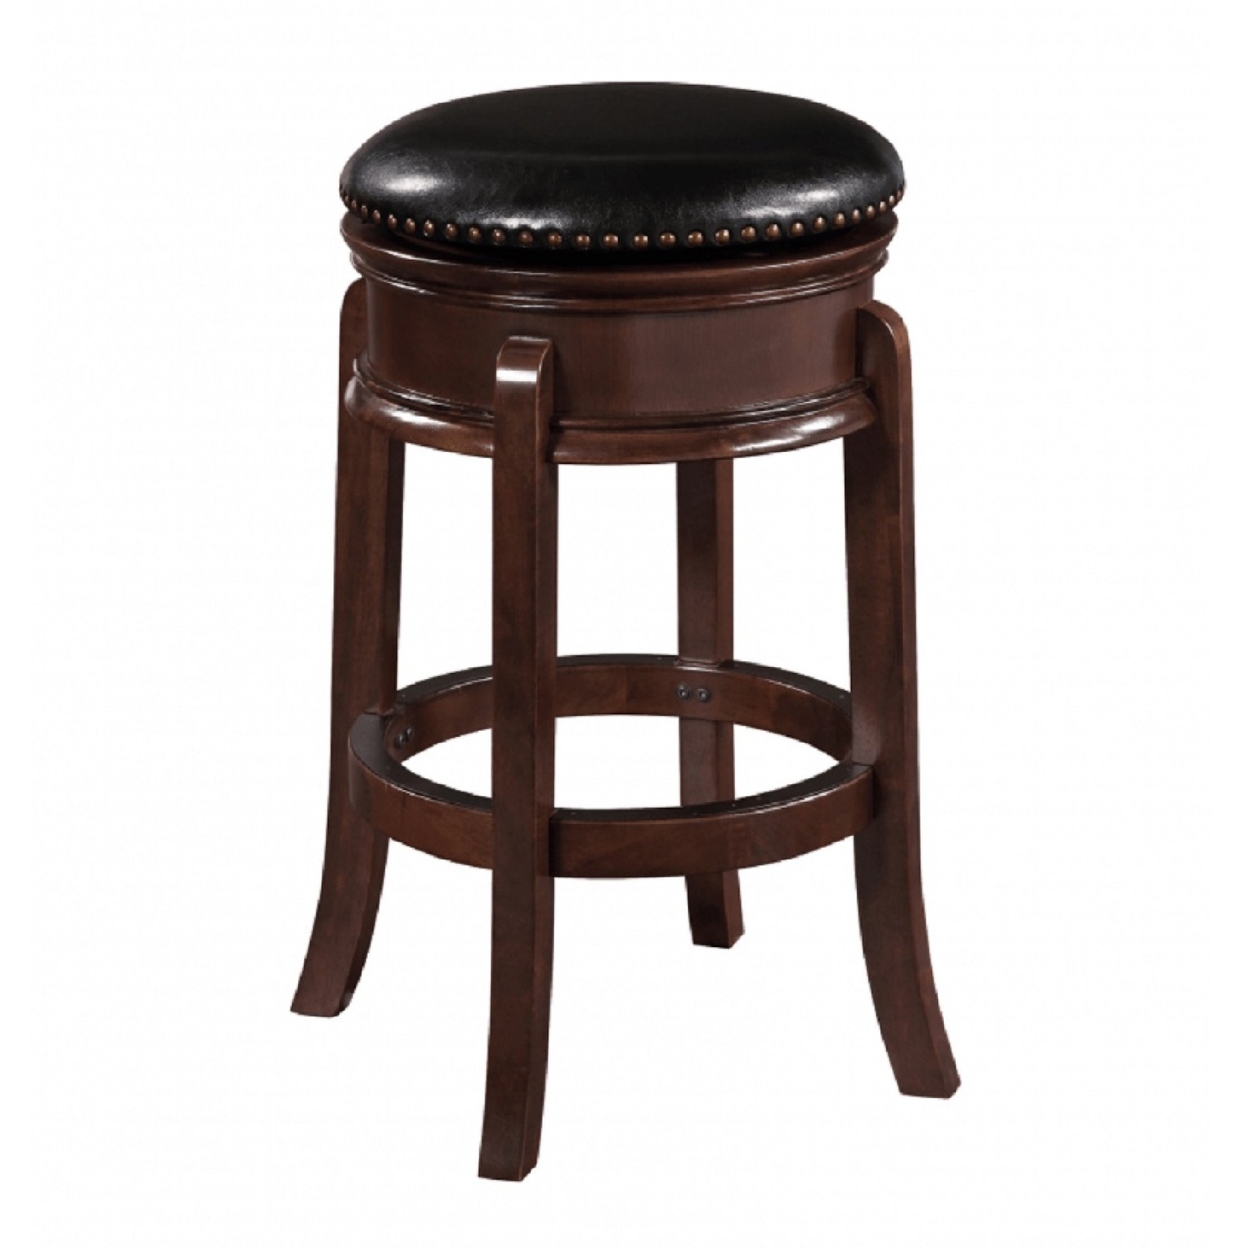 Sabi 29 Inch Swivel Counter Stool, Solid Wood, Faux Leather, Espresso Brown, Black